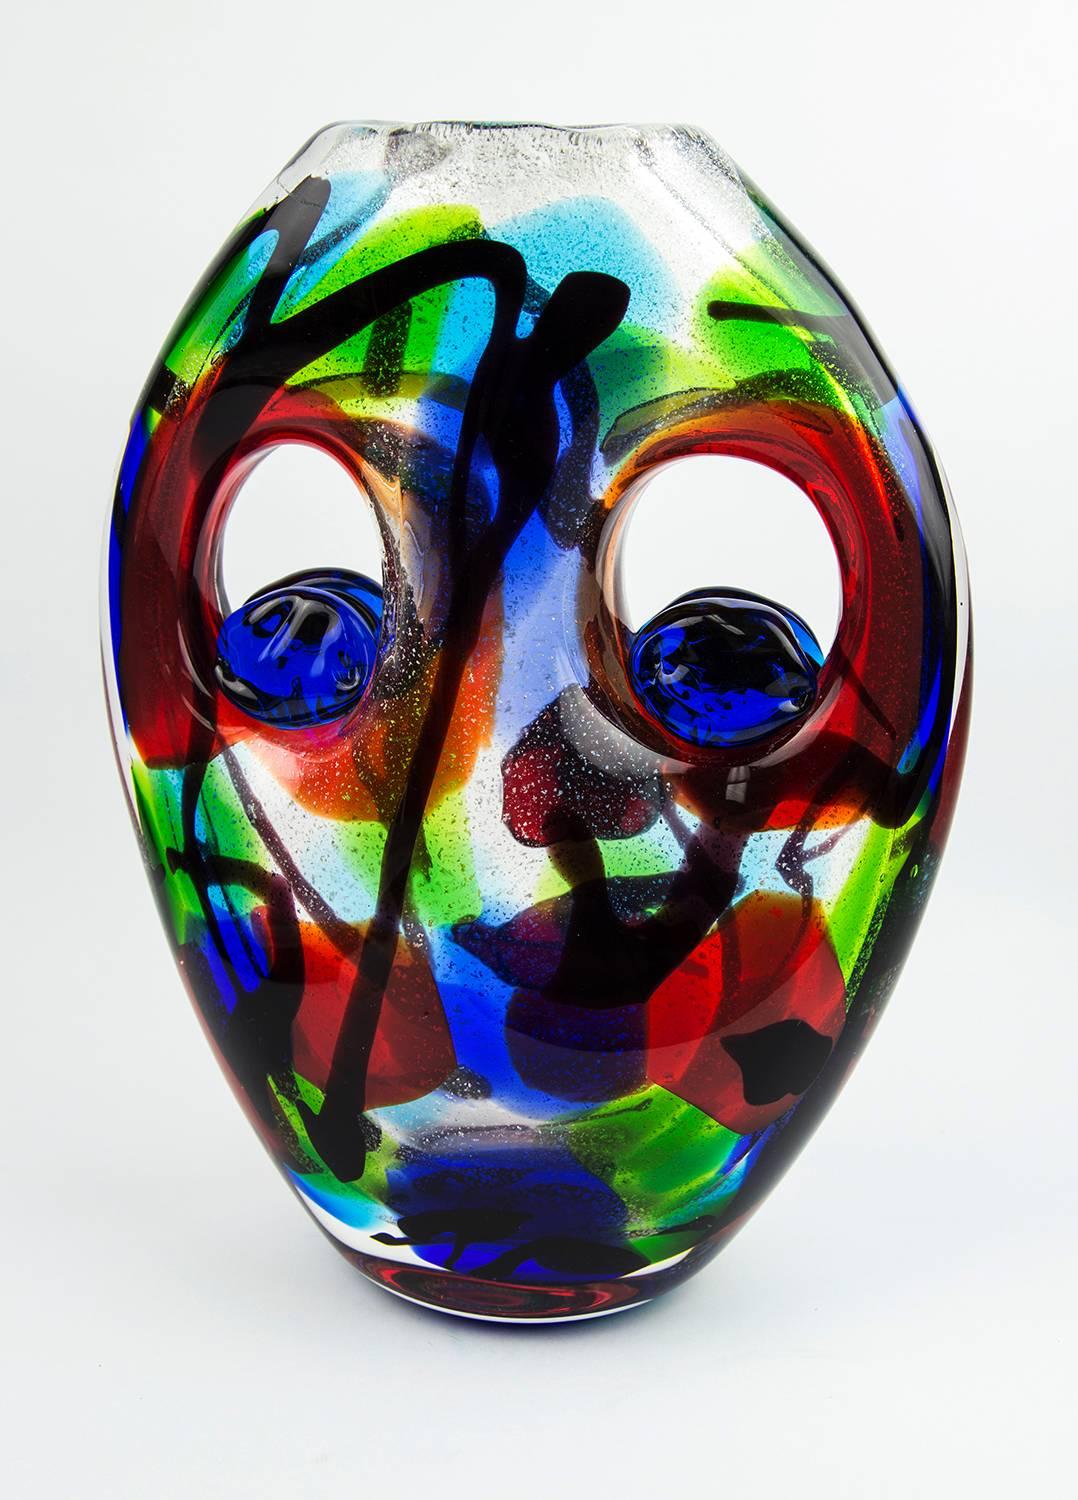 Striking unique two face design multi Sommerso world class art glass vase; high quality with intense reflecting colors including silver leaf inclusions;
 applied to both sides of  the double openings in the  vase, the brilliant blue eyes stare